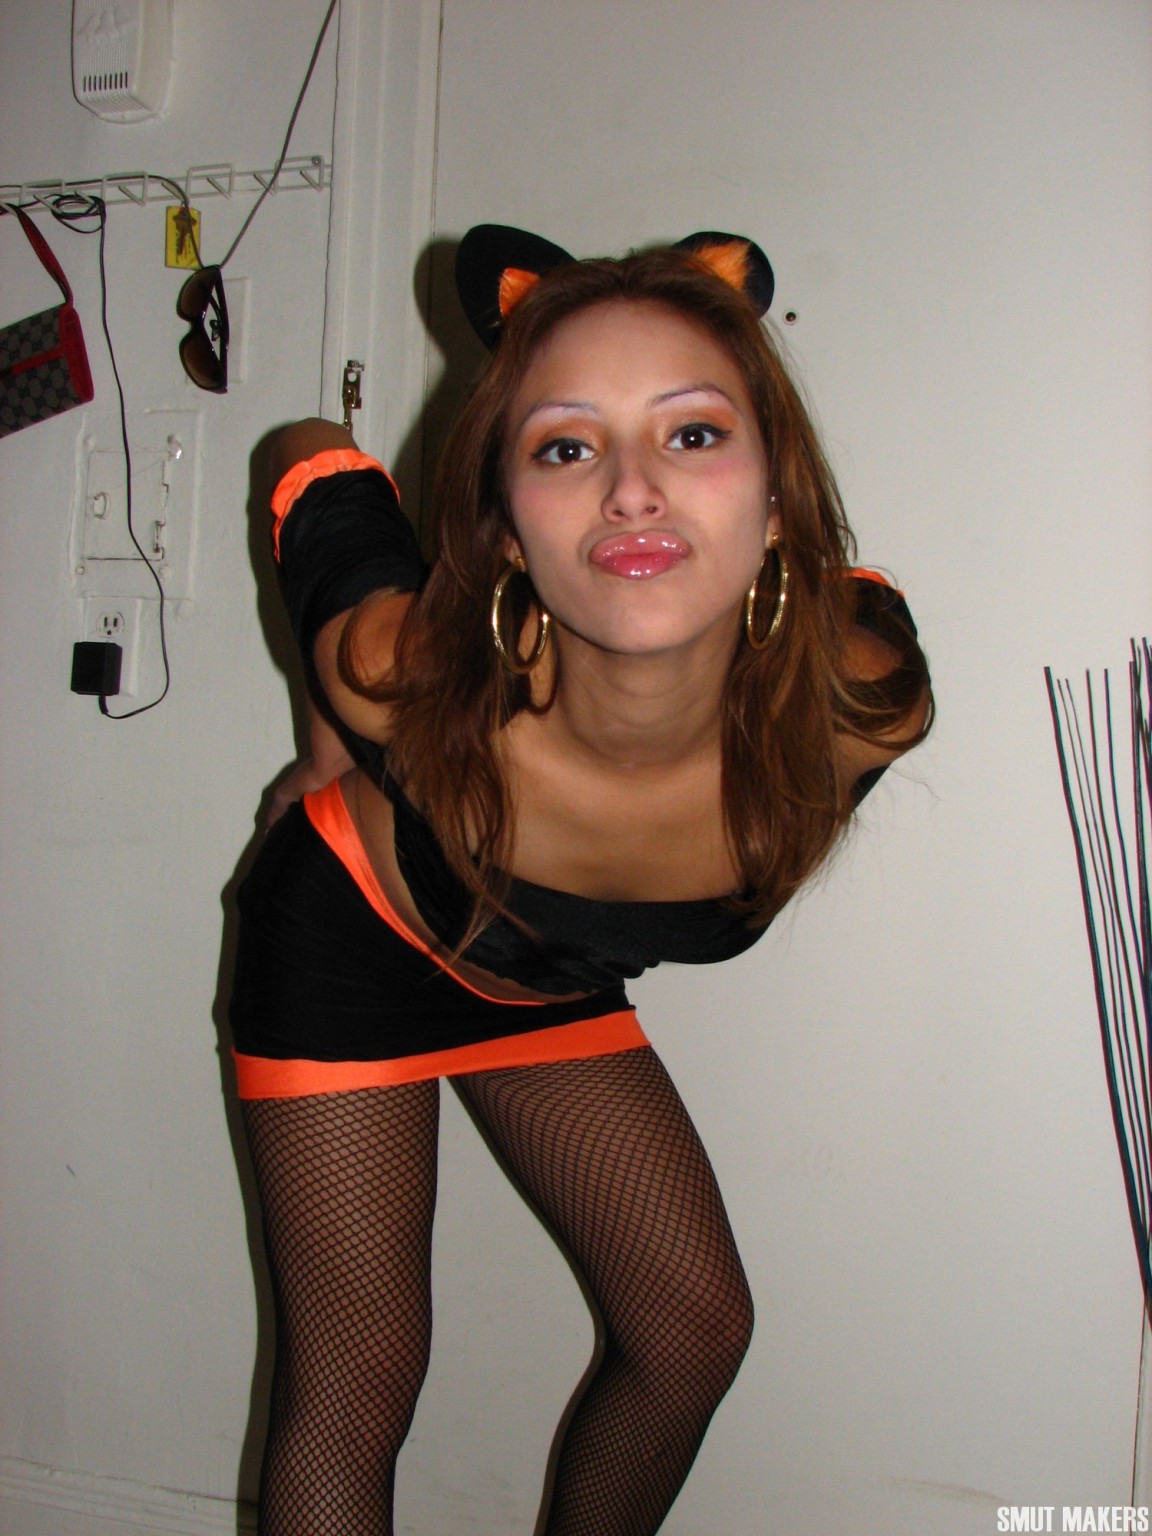 Latina teen is ready for Halloween in her cute Kitty costume #67947432